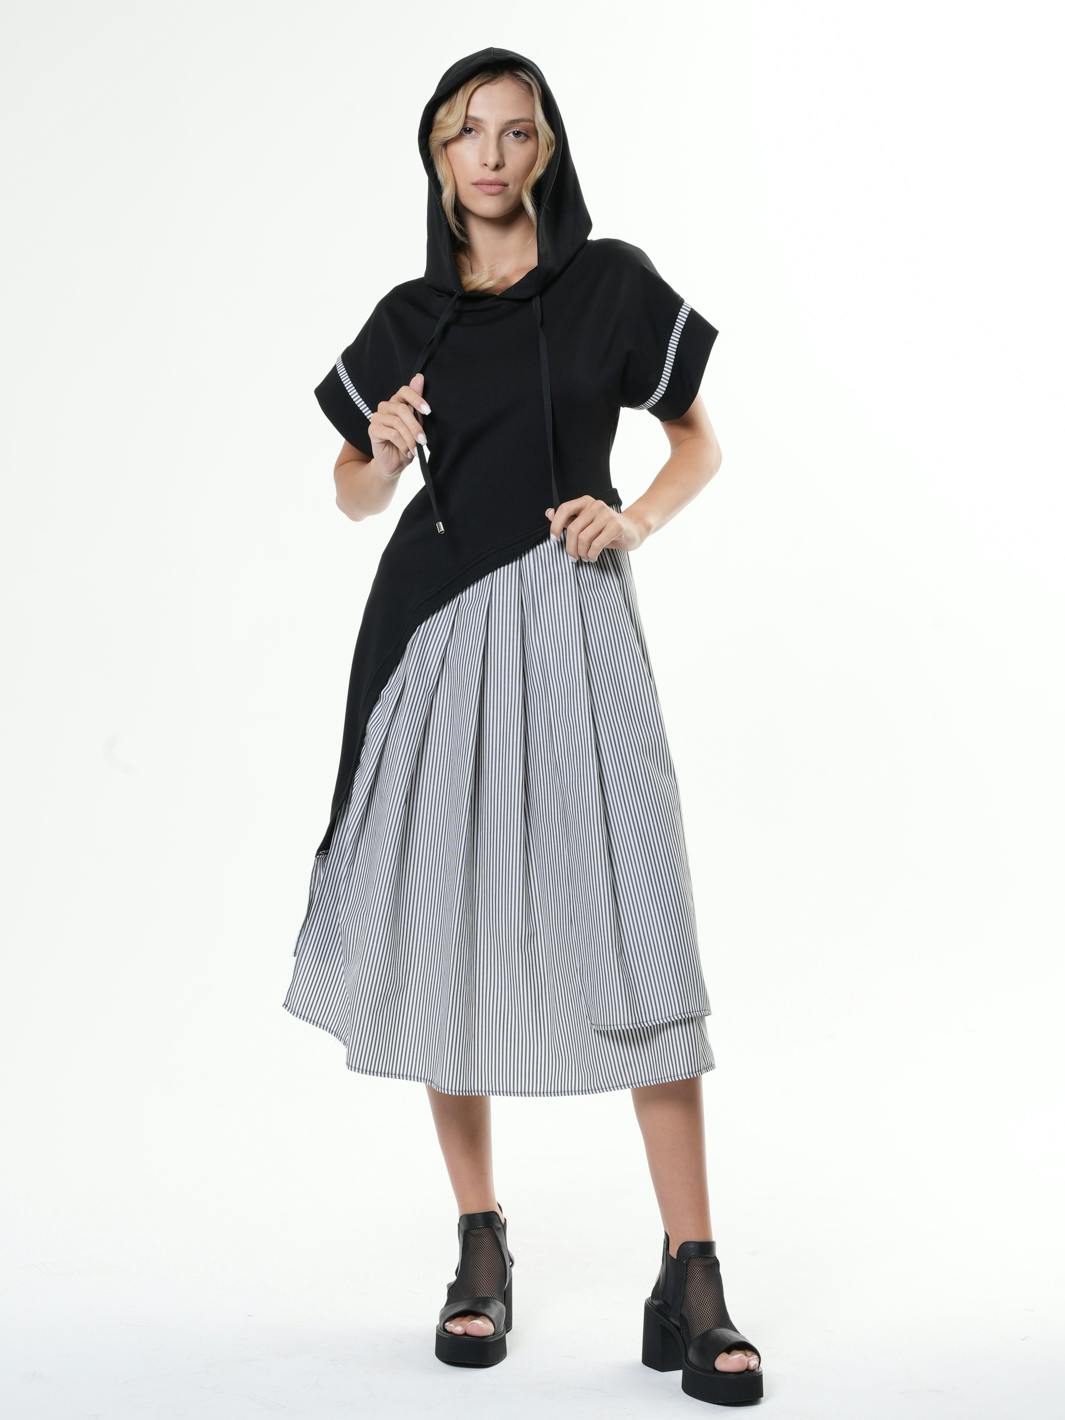 Thumbnail preview #1 for Asymmetric Hooded Dress With Short Sleeves 